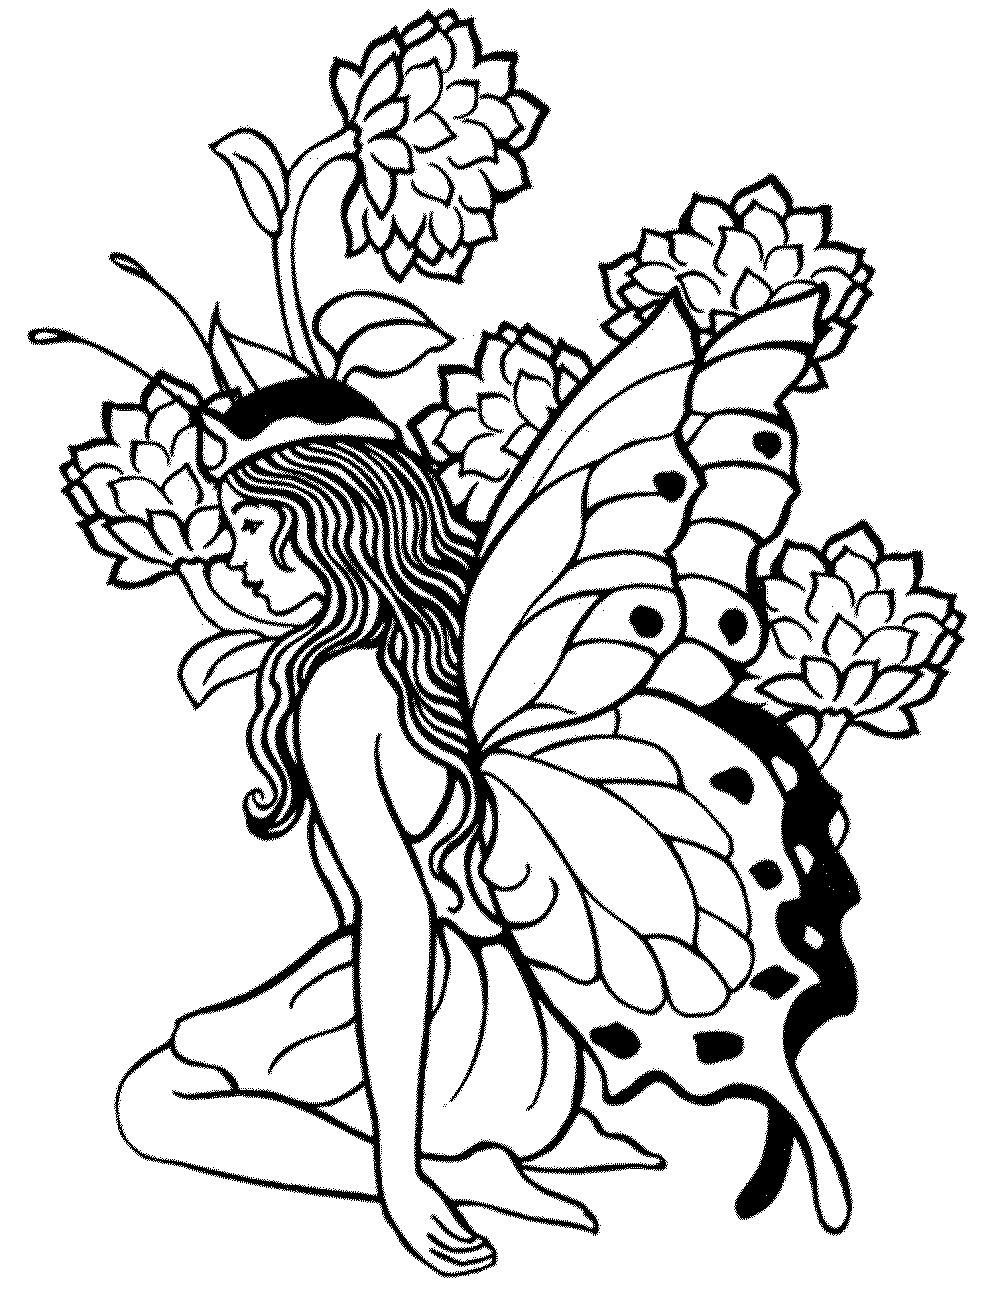 Coloring Pages Ideas Fairying Pages To Print Free For Adults Dark